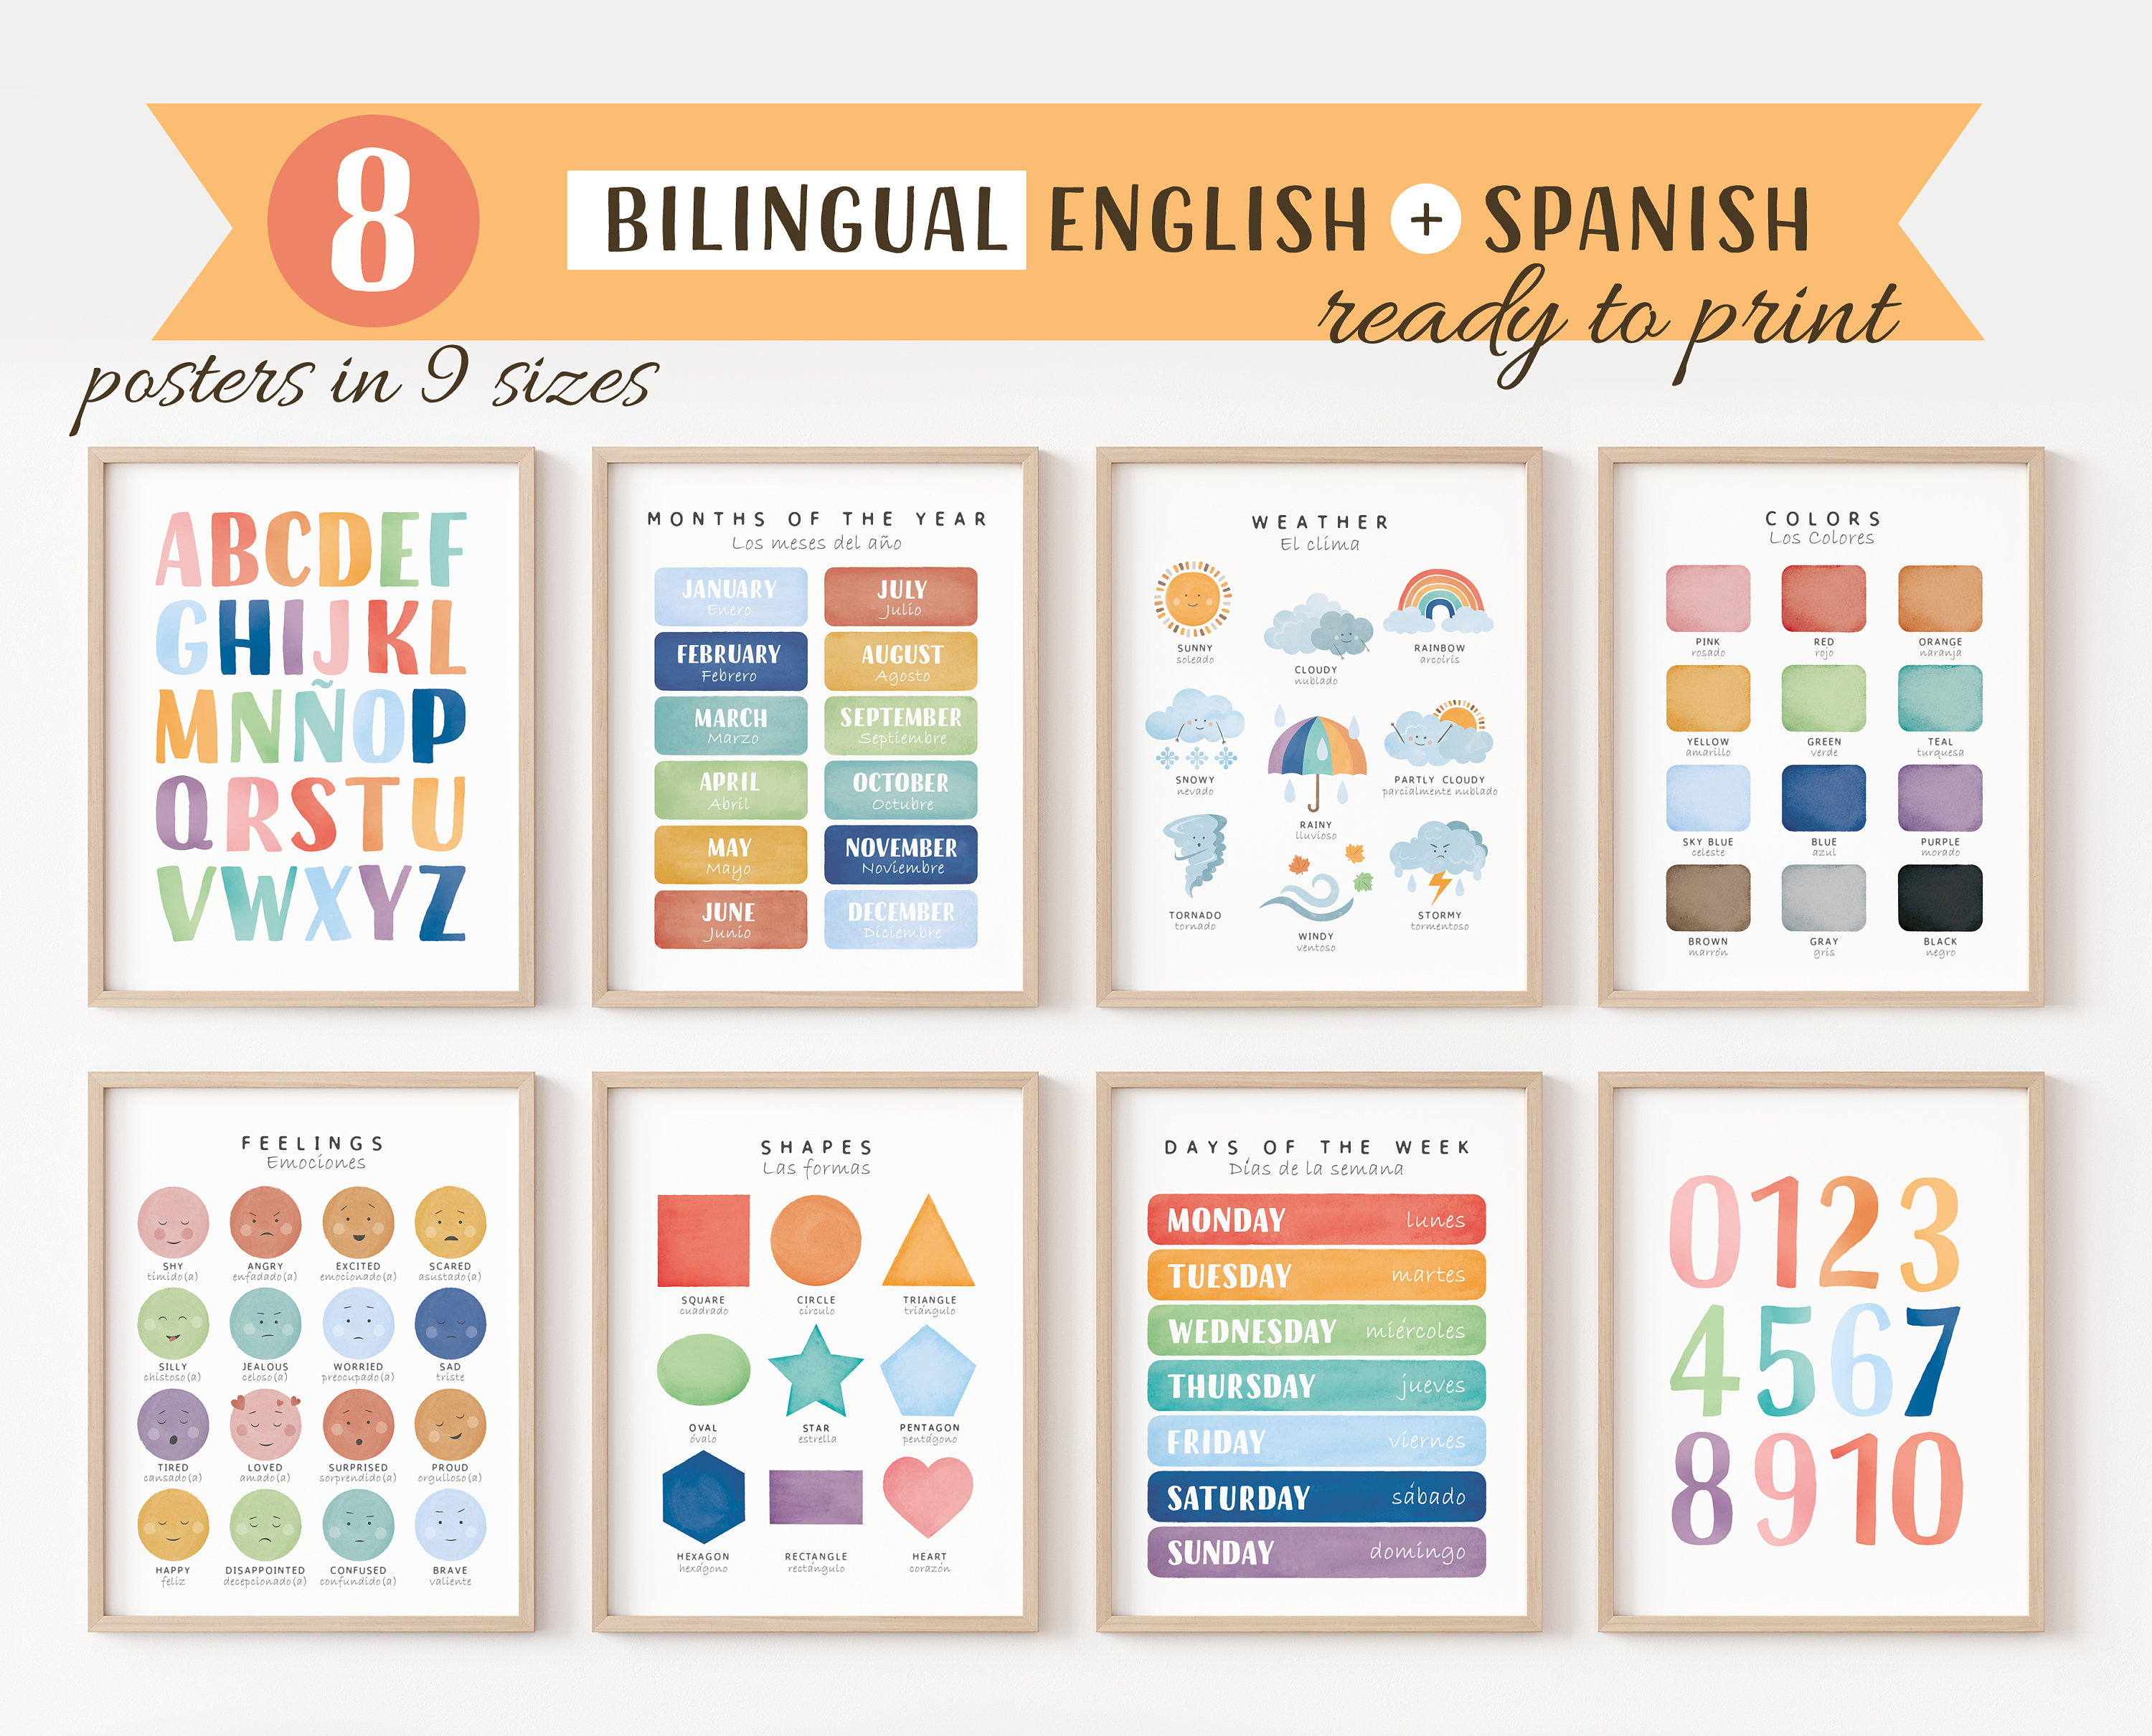 El Alfabeto Spanish Educational Posters for Kids Alphabet Bilingual Classroom and Homeschool Learning Visual Aid and Chart Decorations for Classrooms